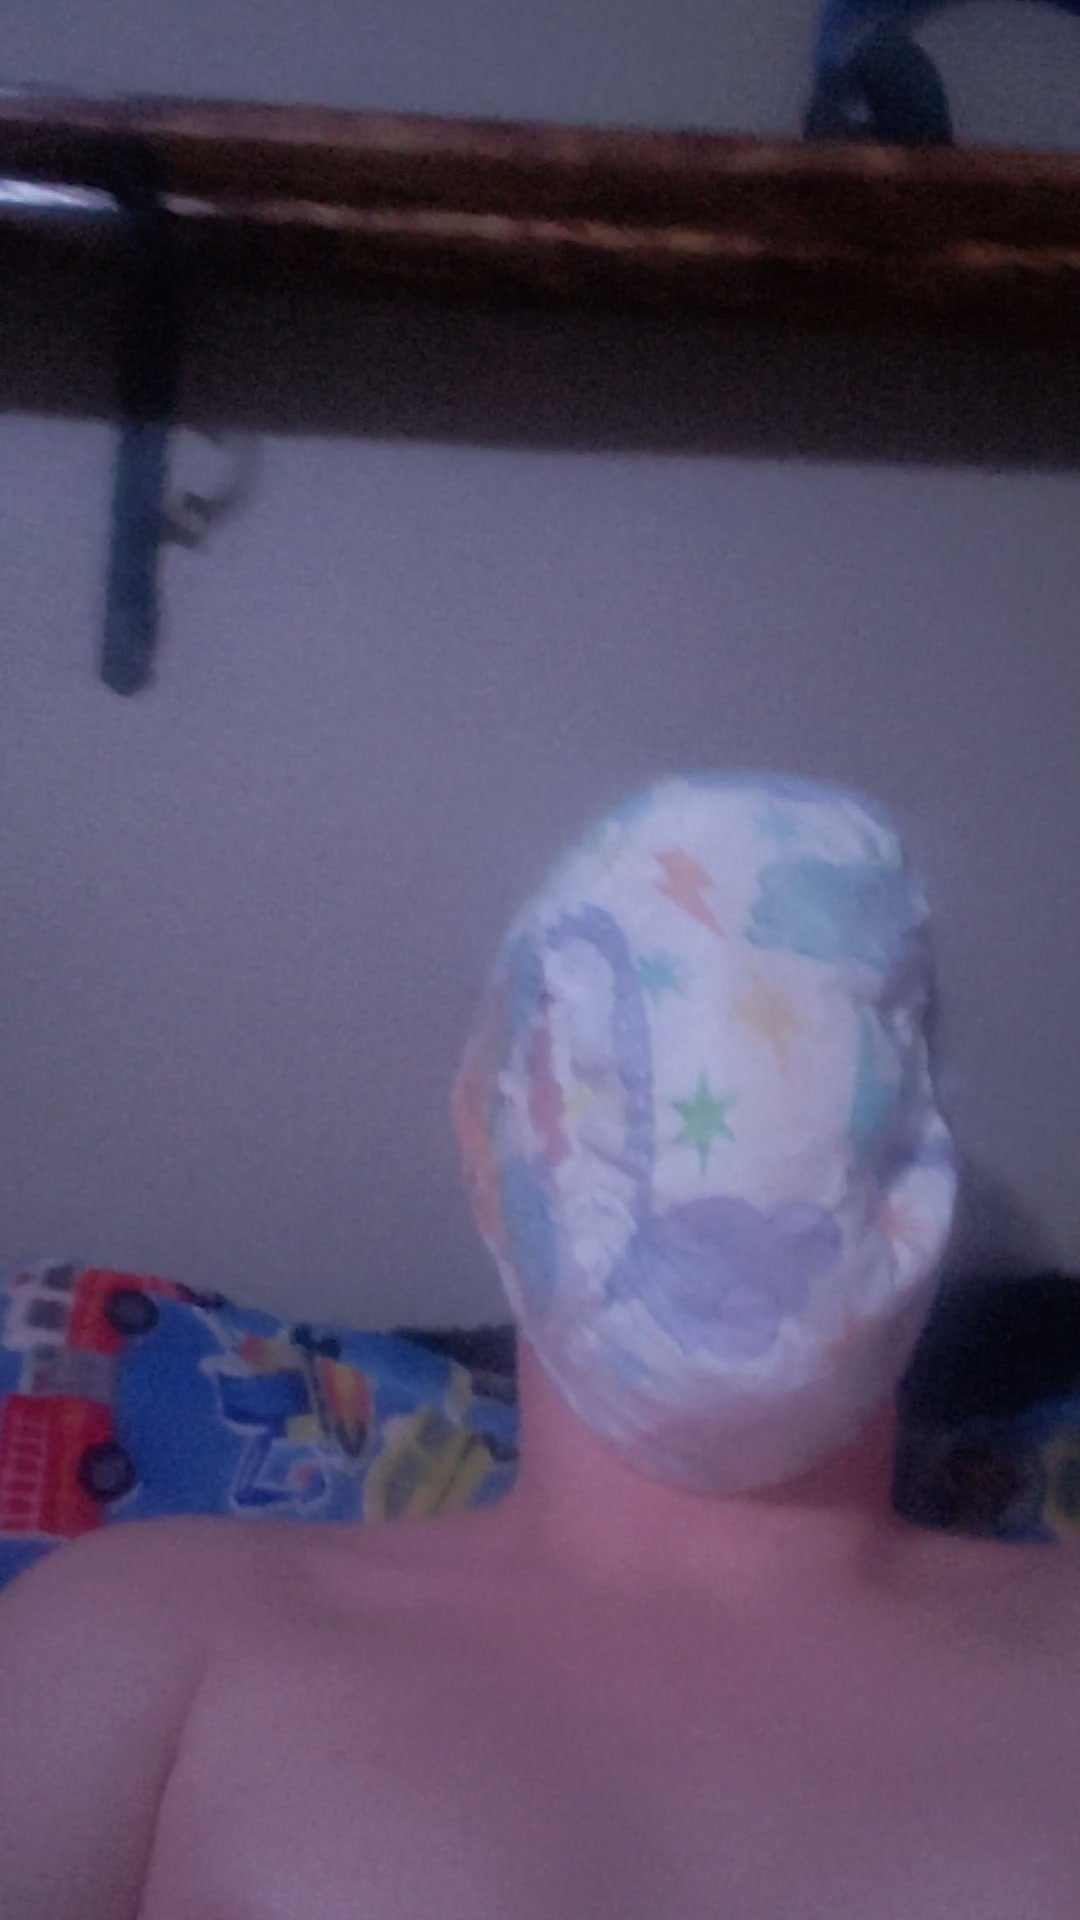 Used diaper on face